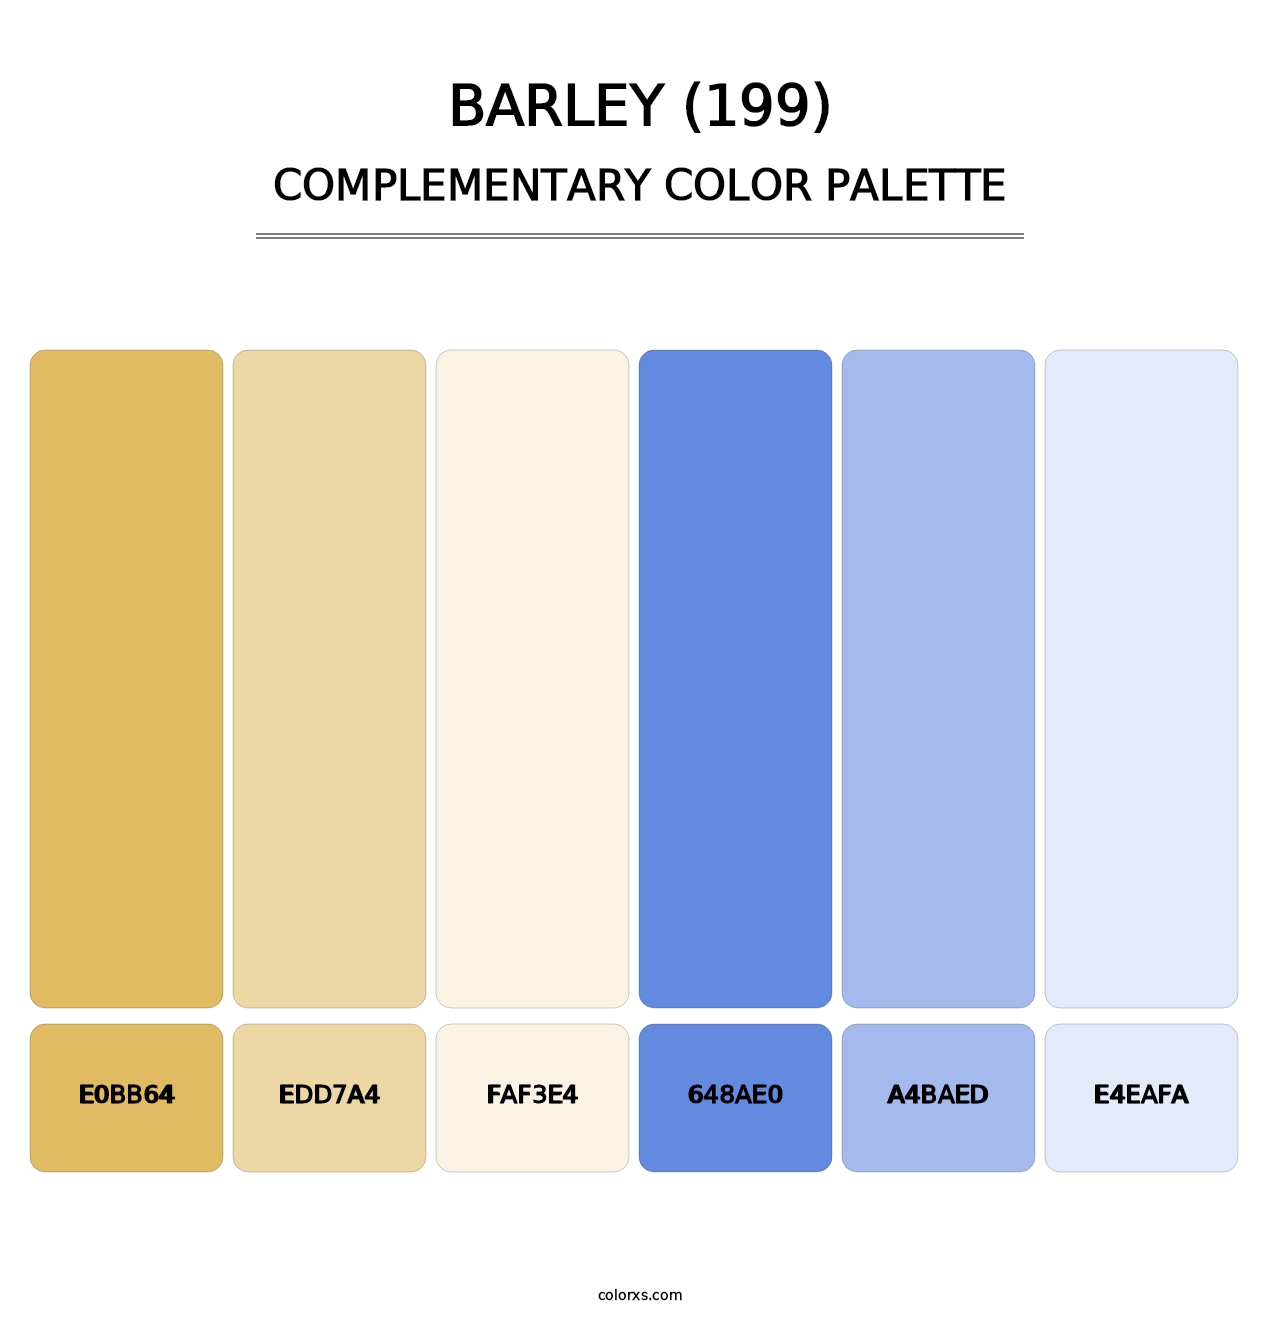 Barley (199) - Complementary Color Palette